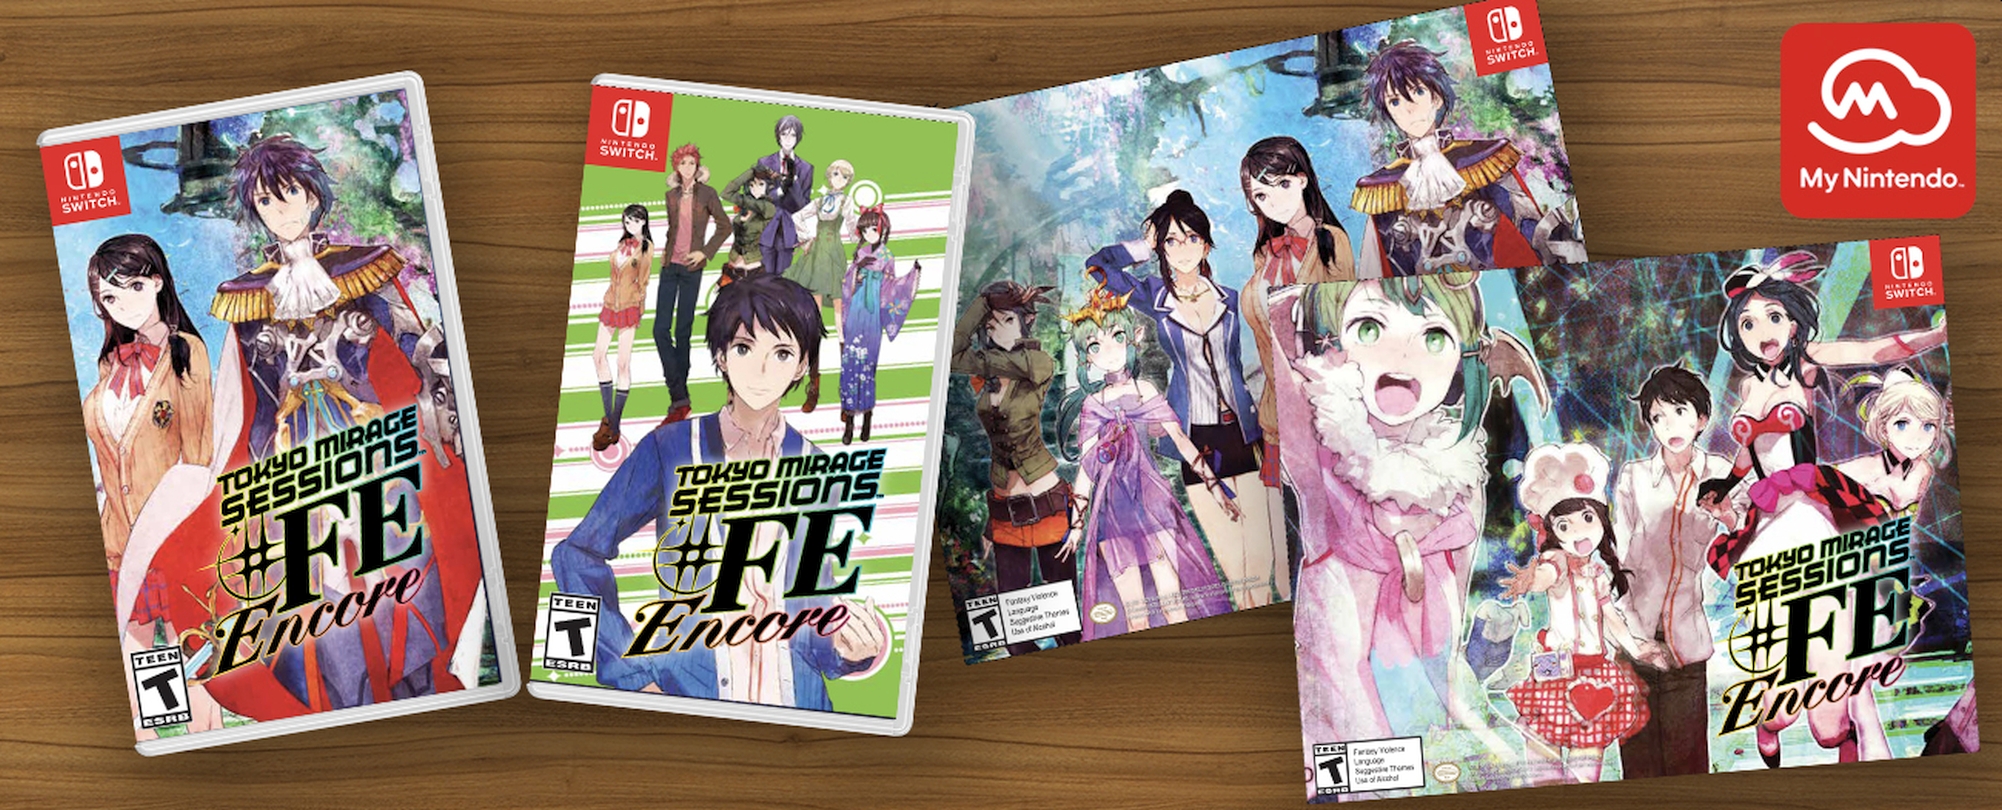 My Nintendo Now Offers Four New Printable Tokyo Mirage Sessions #FE Encore Box Art